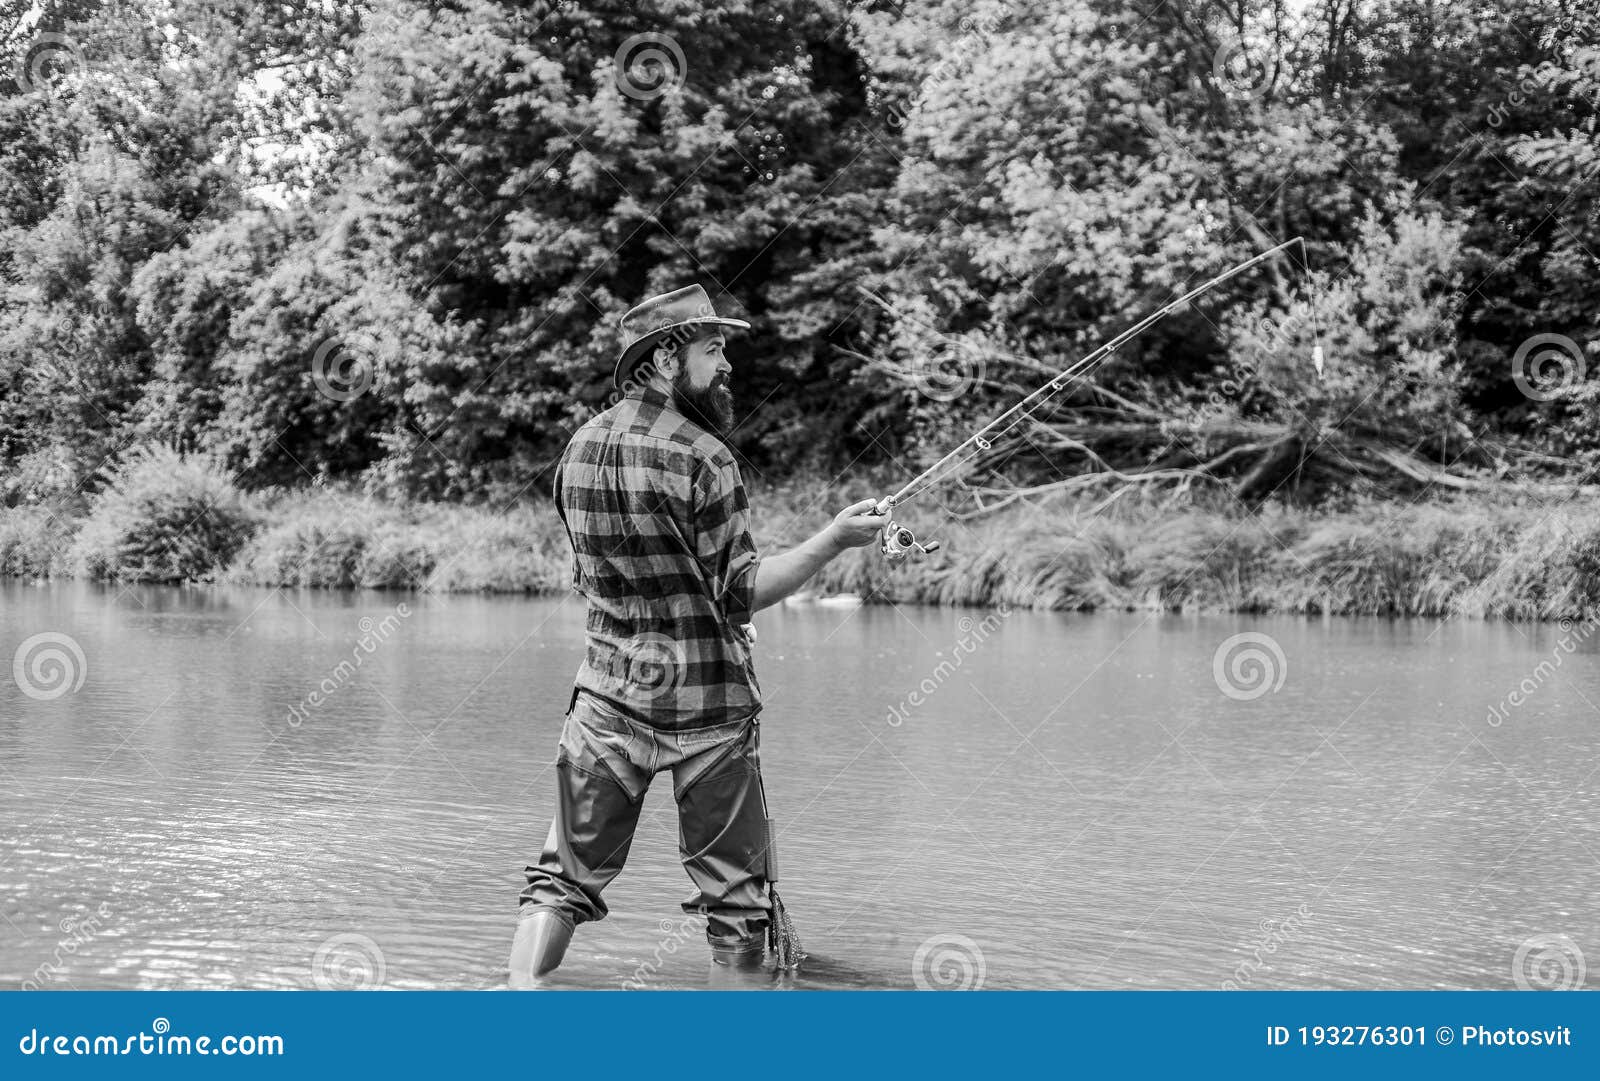 Fishing is the Reel Deal. Summer Weekend. Big Game Fishing. Mature Man Fly  Fishing. Man Catching Fish Stock Image - Image of pothunter, sport:  193276301